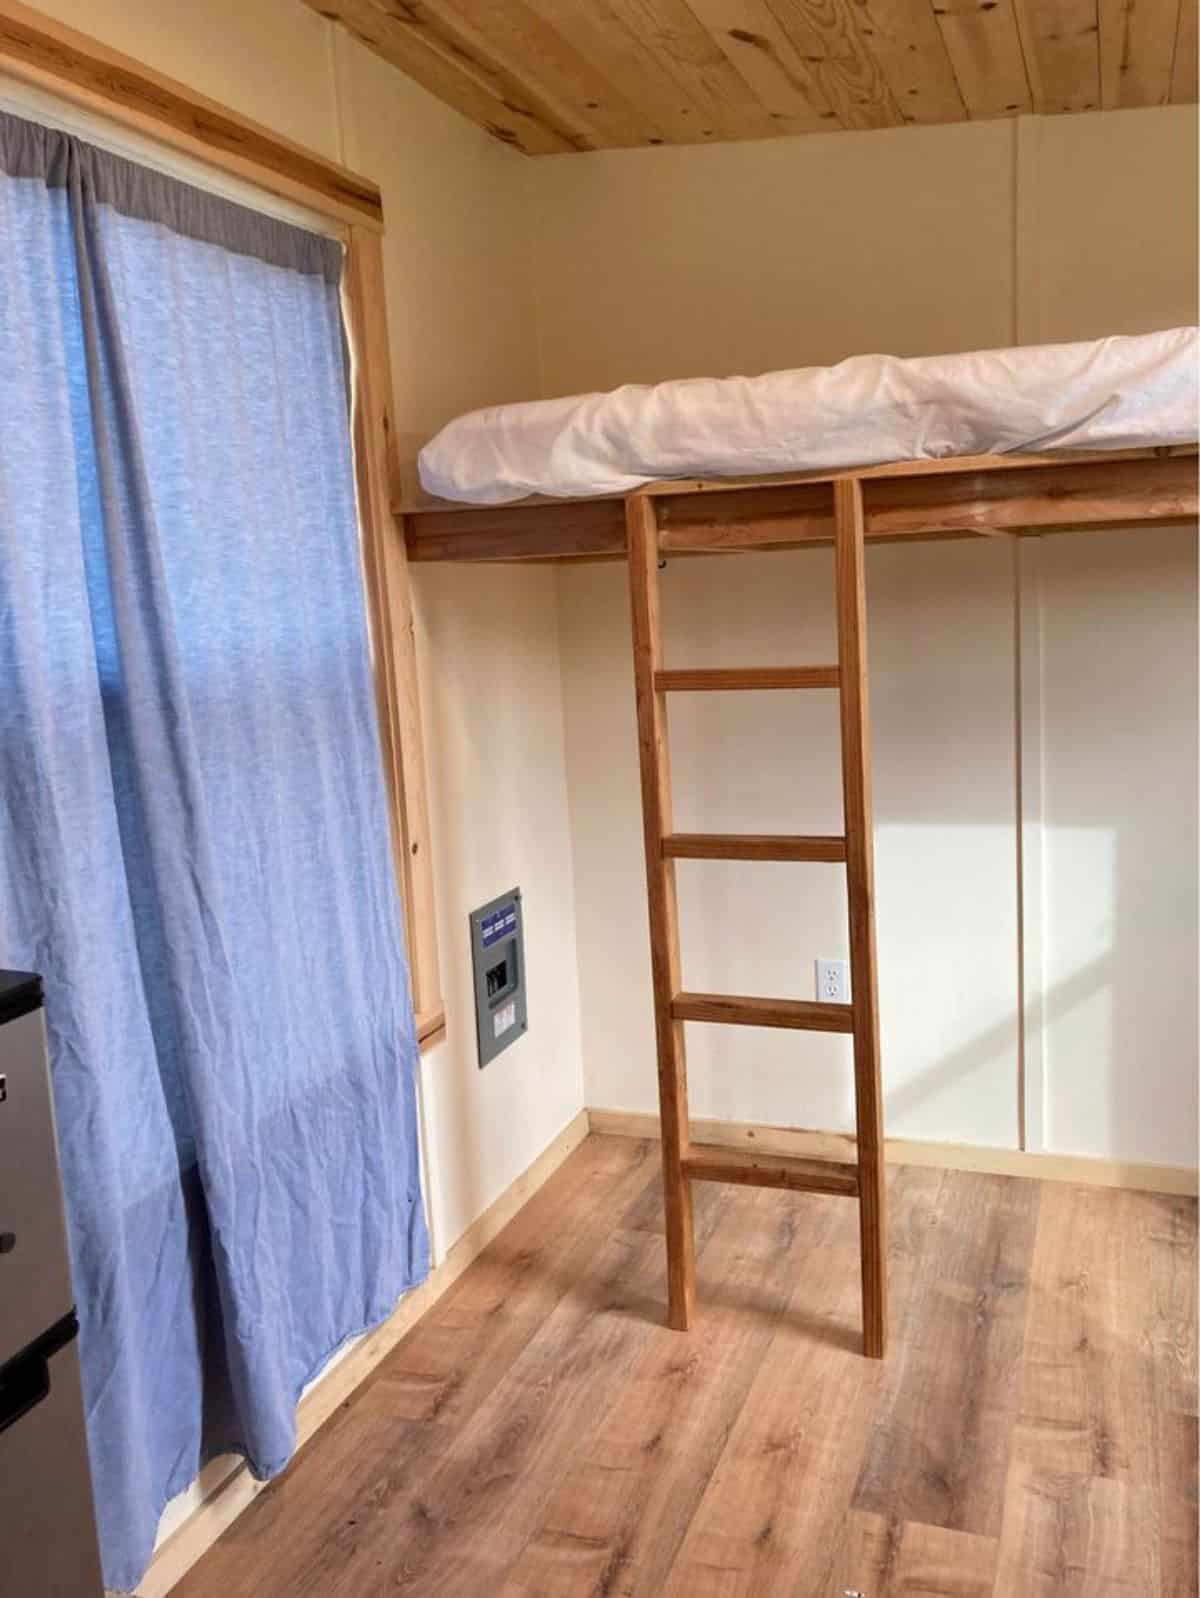 ladder leading to the sleeping area of micro cabin house